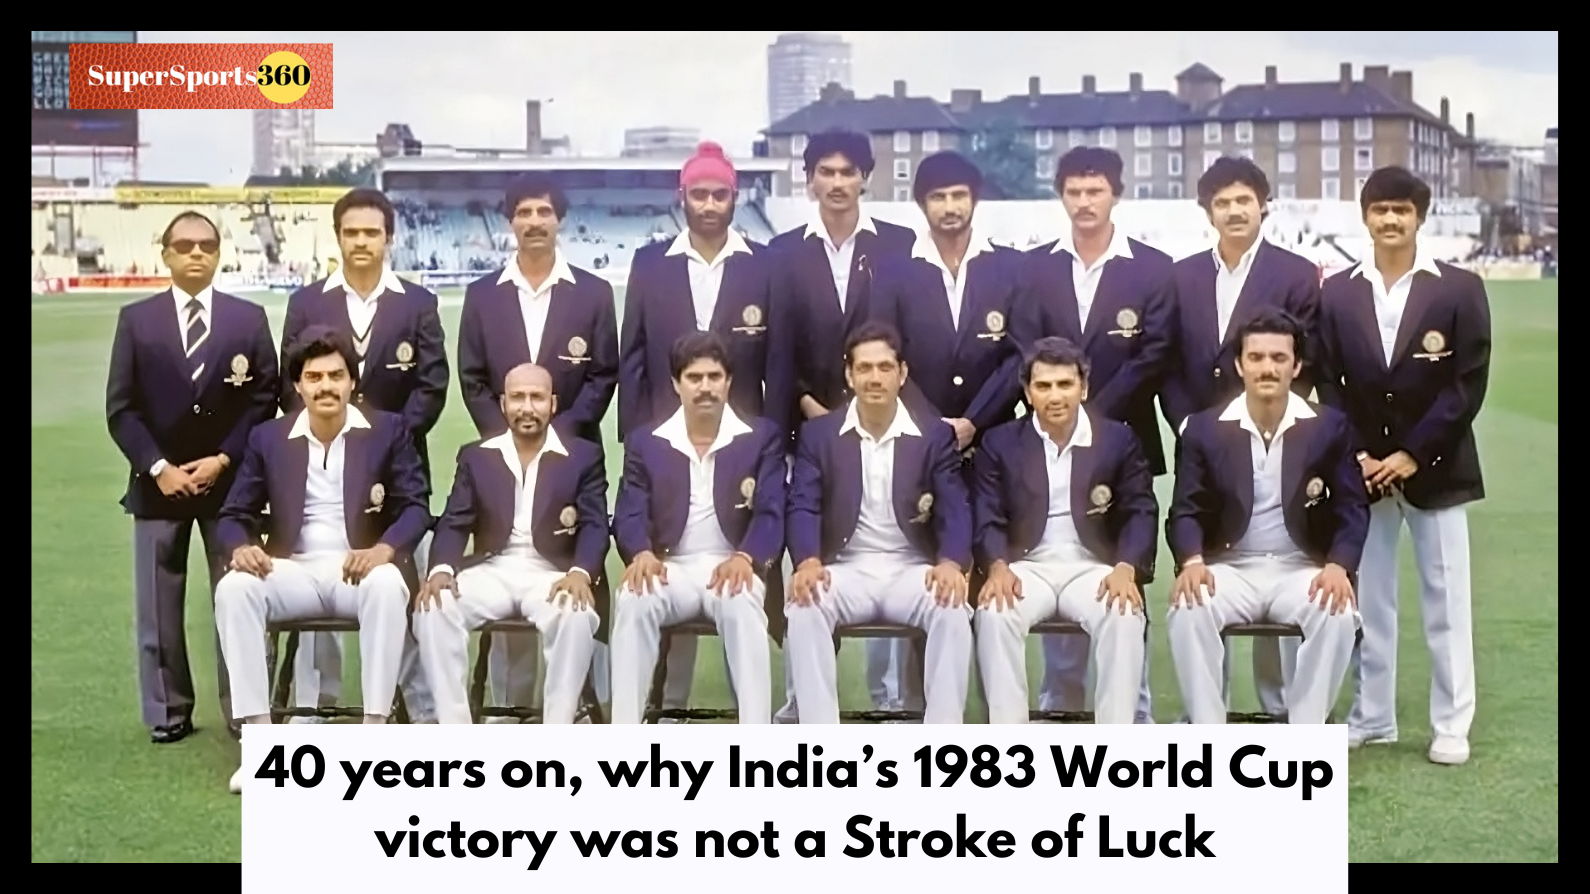 40 years on, why India’s 1983 World Cup victory was not a Stroke of Luck